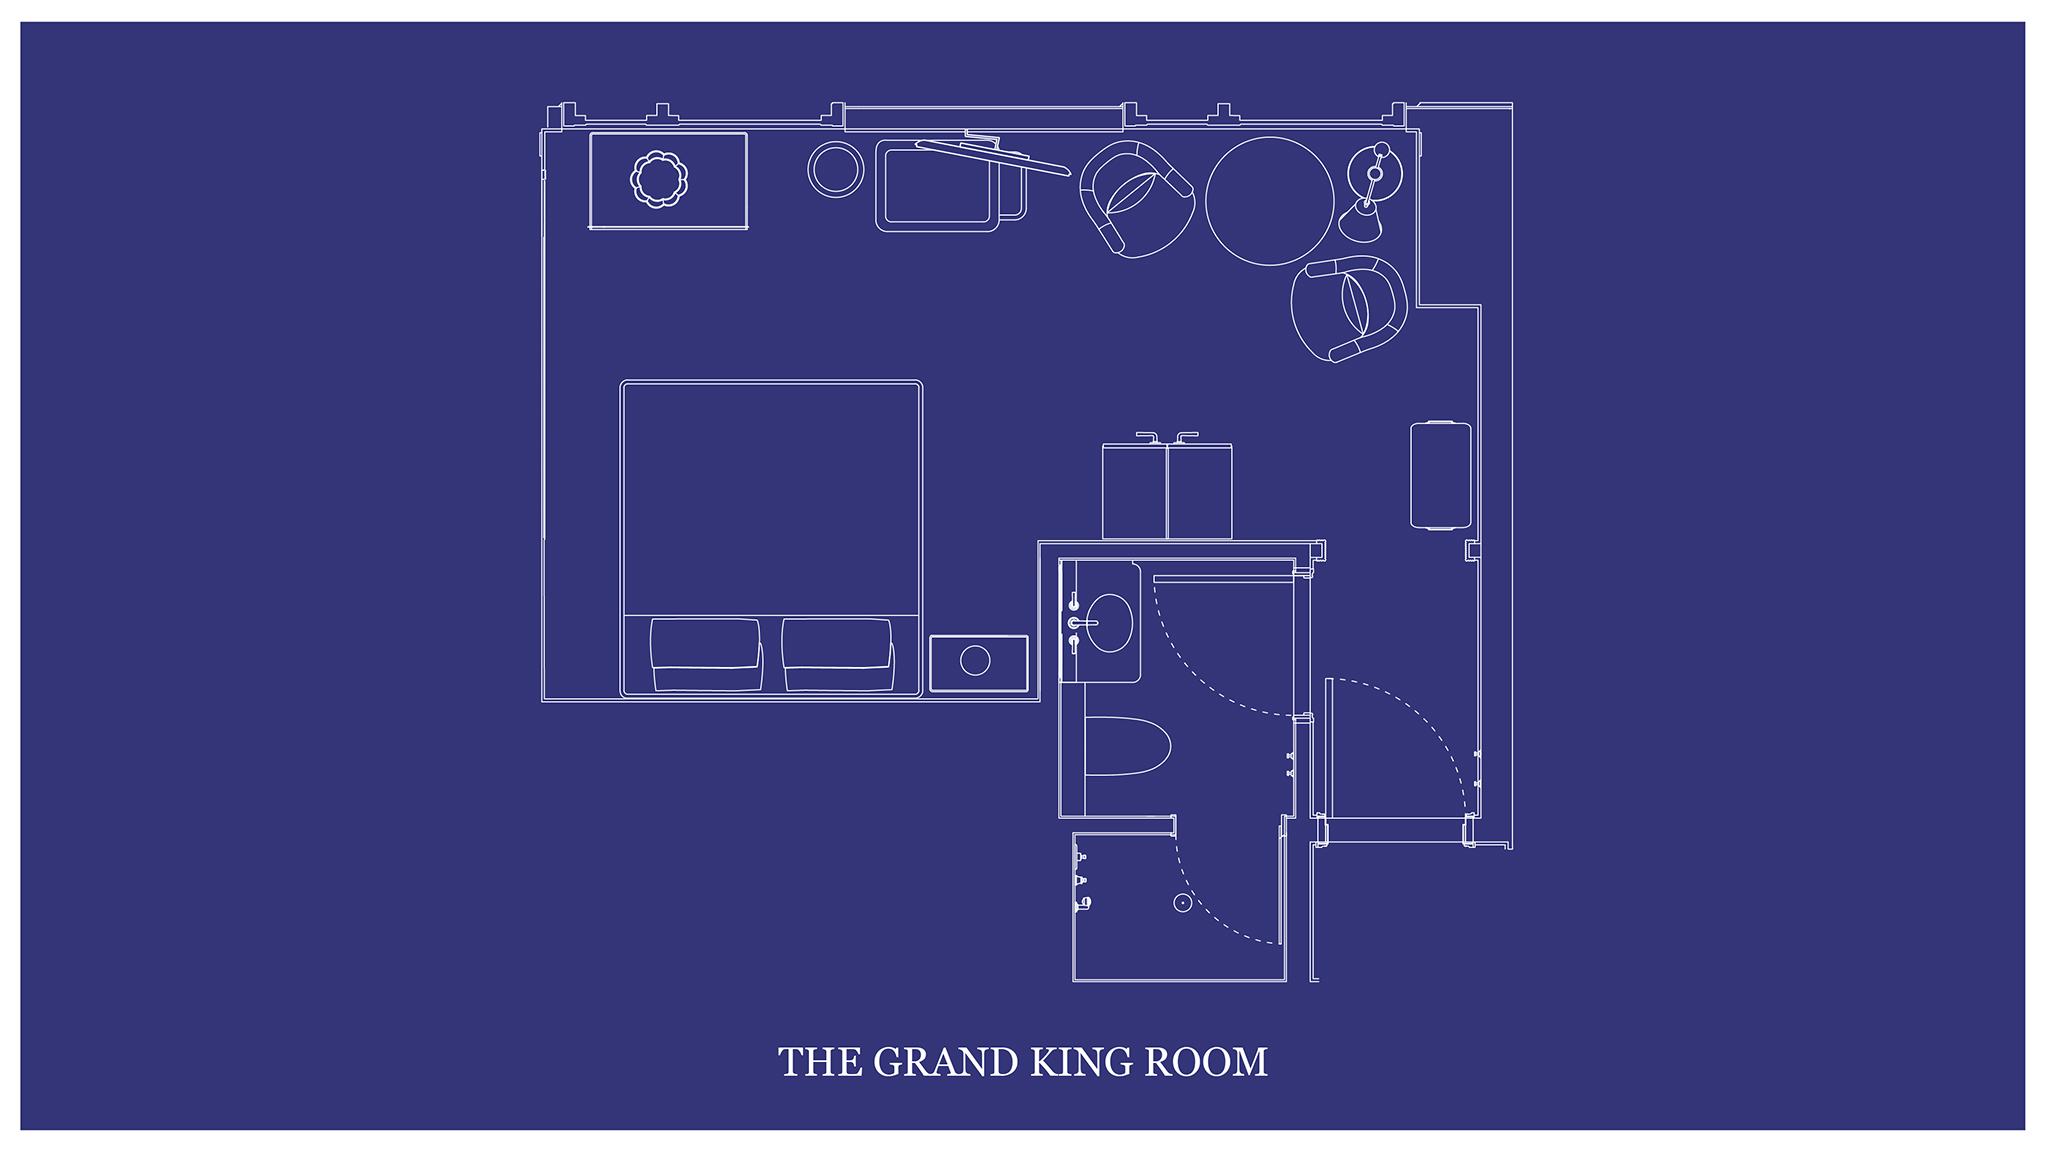 The architectural layout of "THE GRAND KING ROOM" is depicted on a blueprint map.